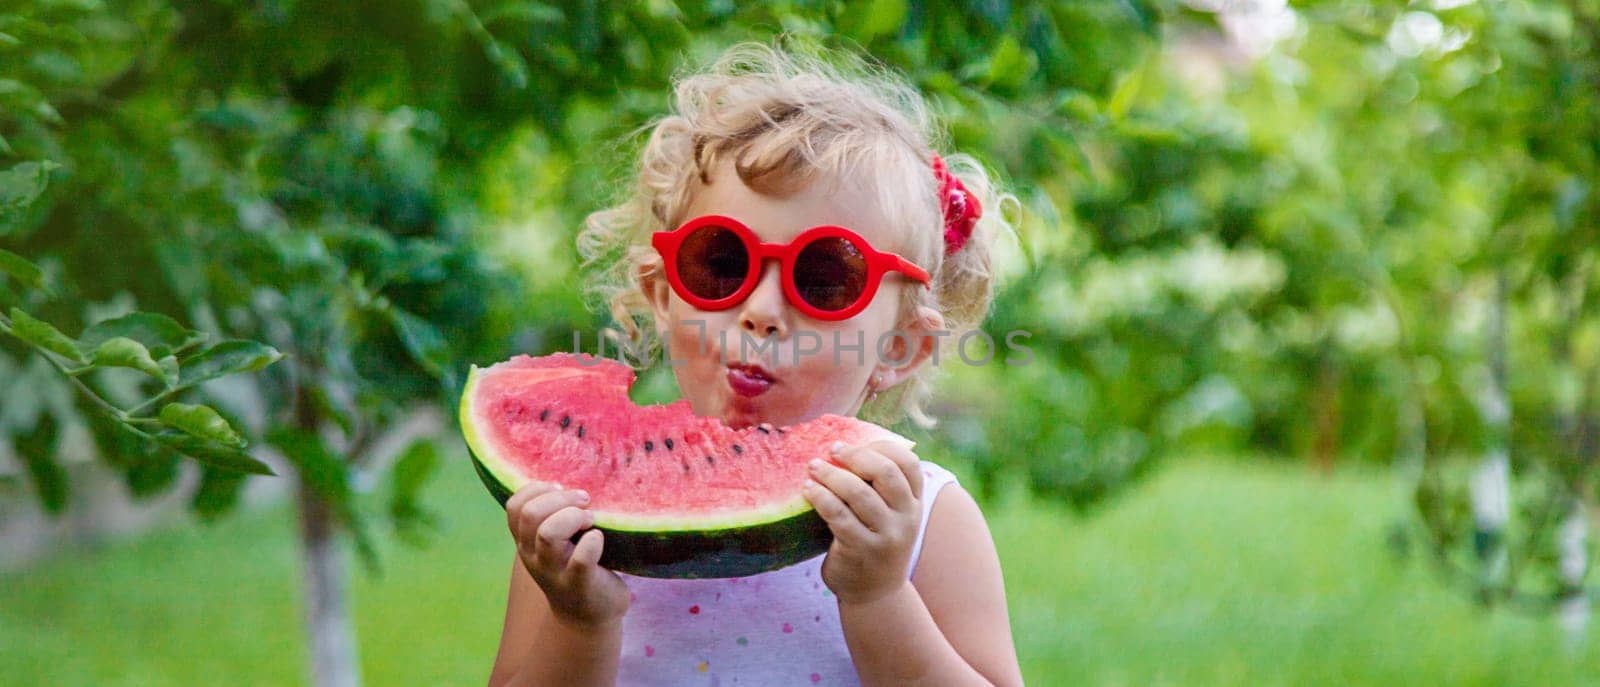 A child eats a watermelon in the park. Selective focus. Food.